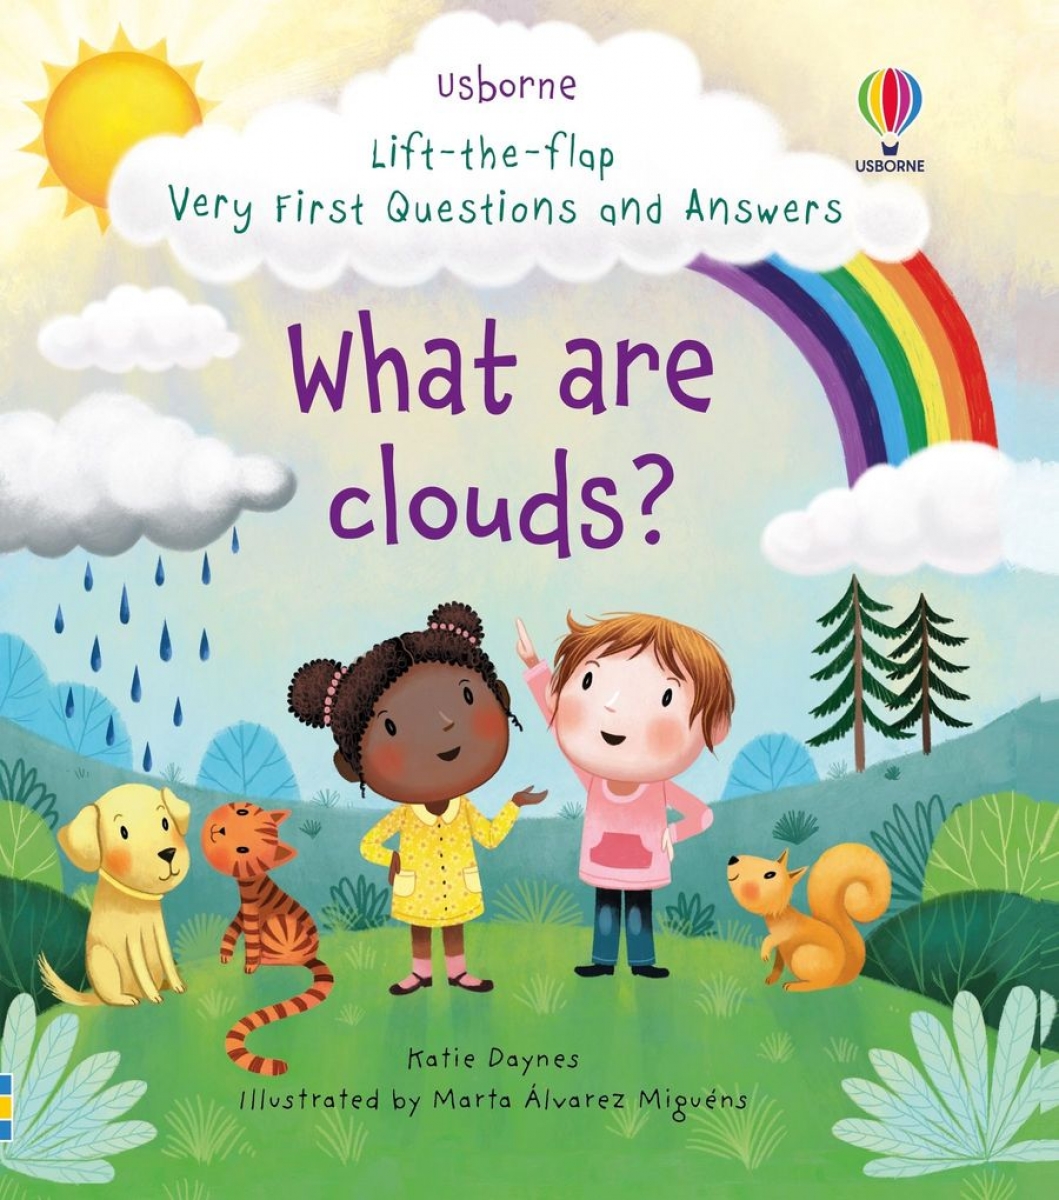 Daynes Katie Lift-the-flap Very First Questions and Answers What are clouds? 